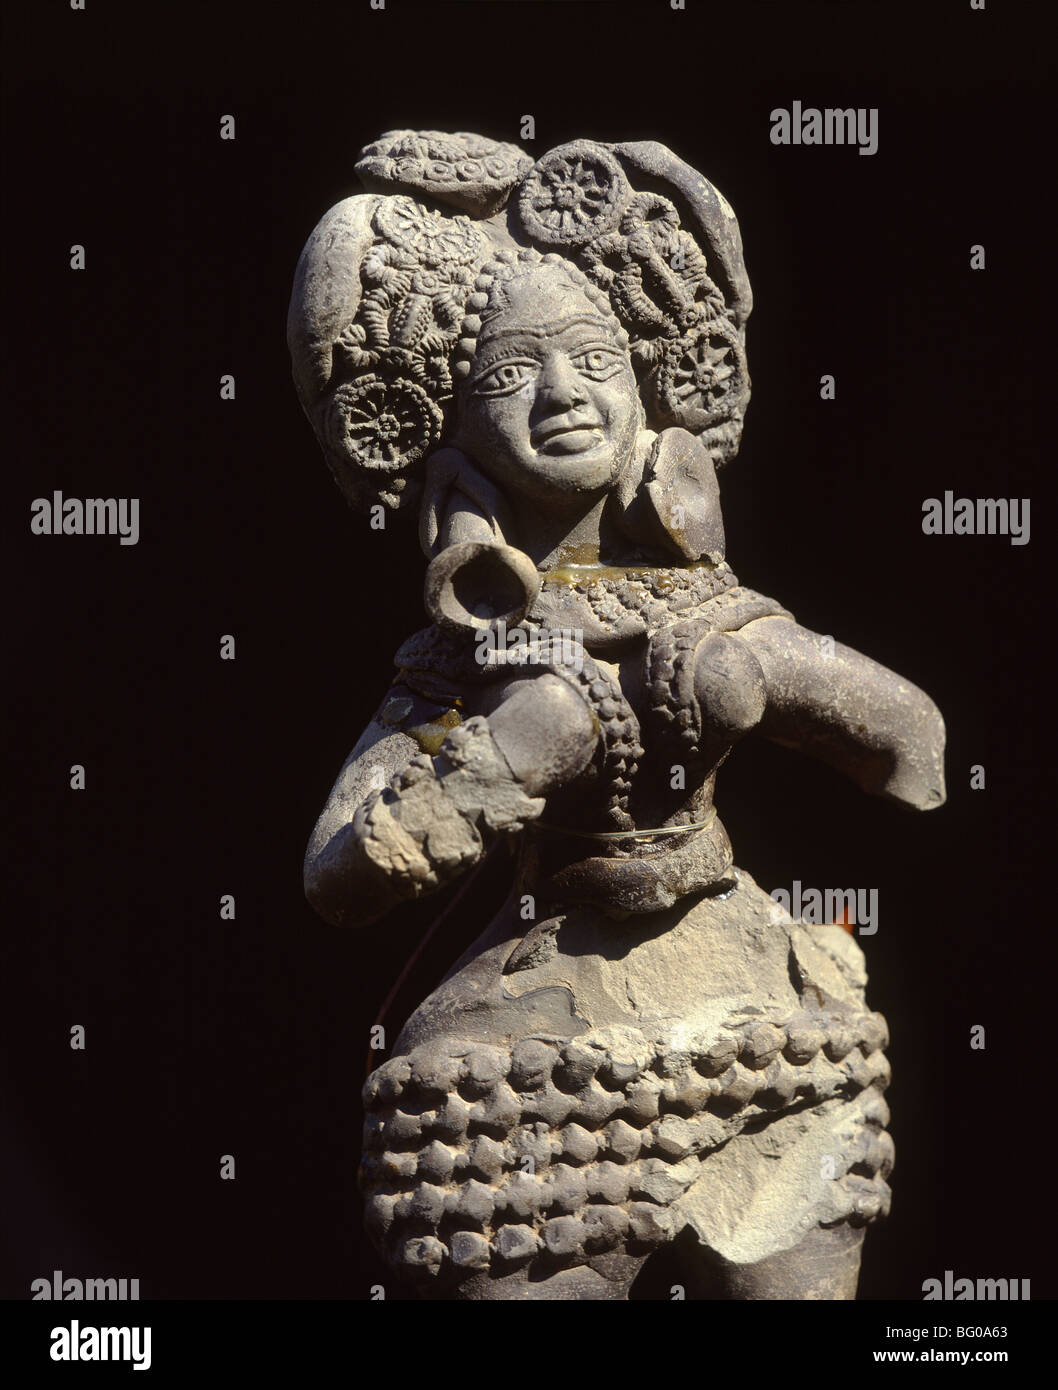 Mother Goddess in rerracotta dating form the 3rd century BC, Government Museum, Mathura, Uttar Pradesh, India, Asia Stock Photo